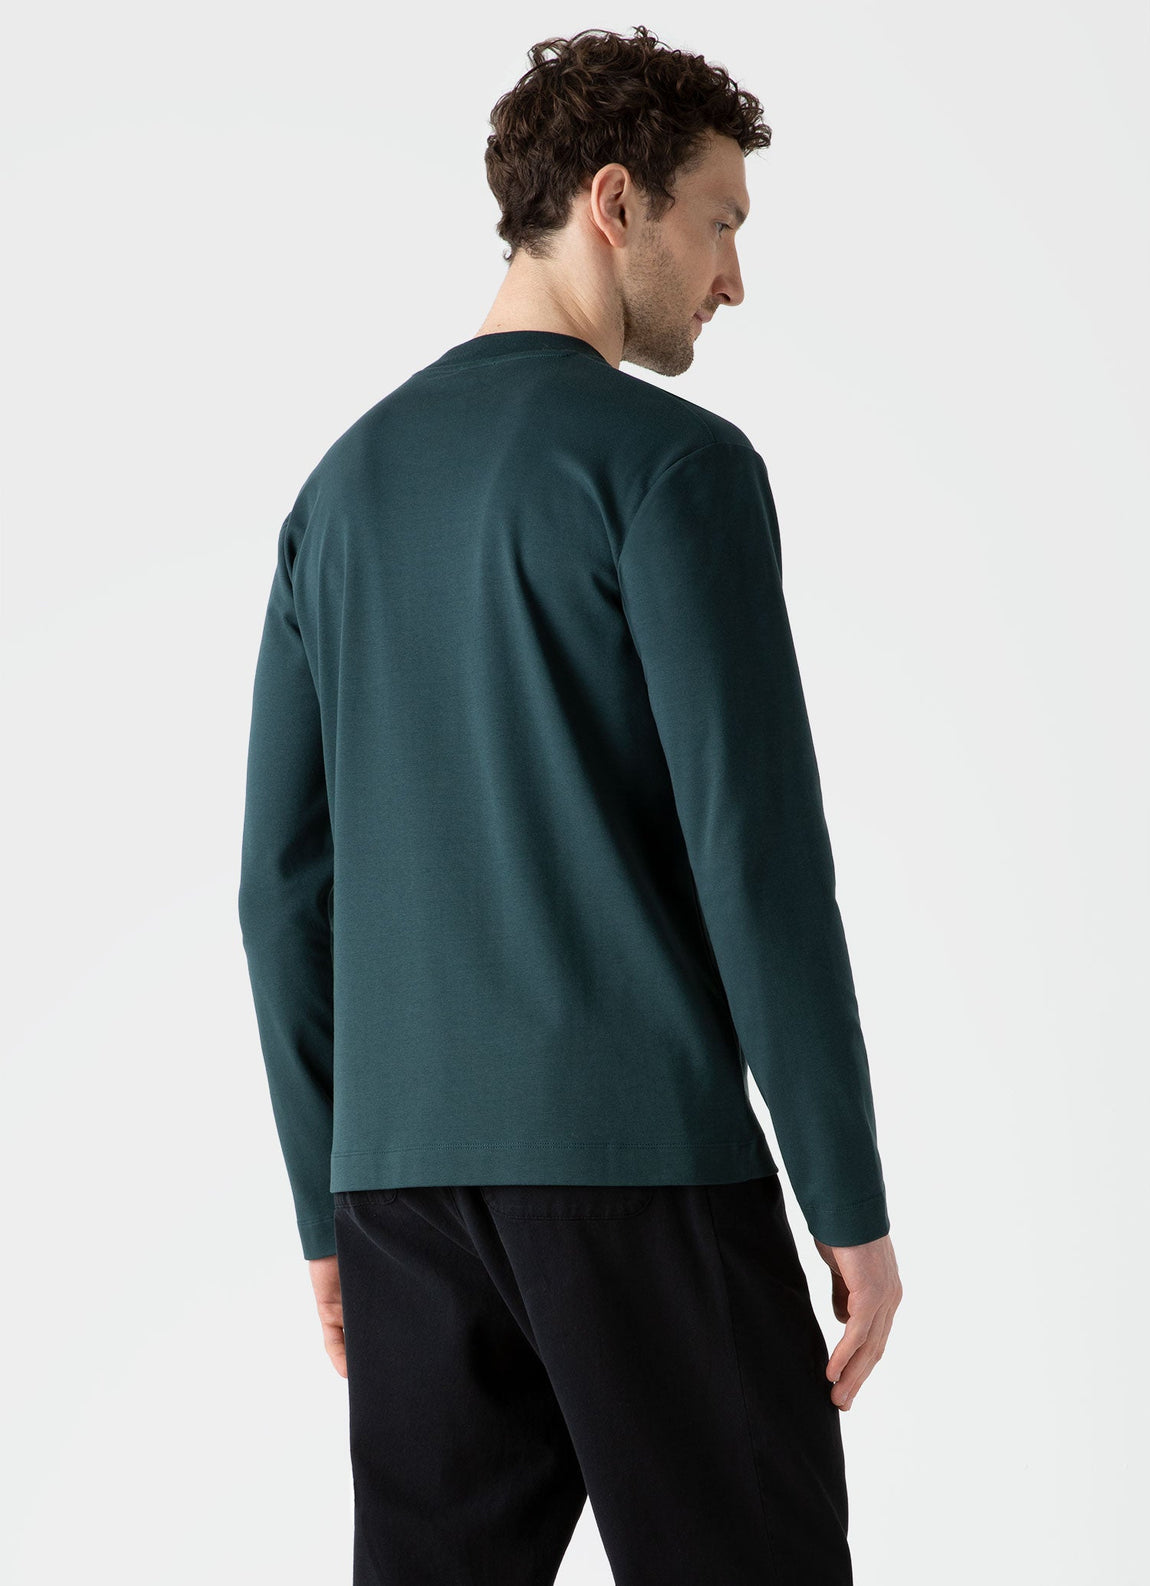 Men's Brushed Cotton Long Sleeve T-shirt in Peacock